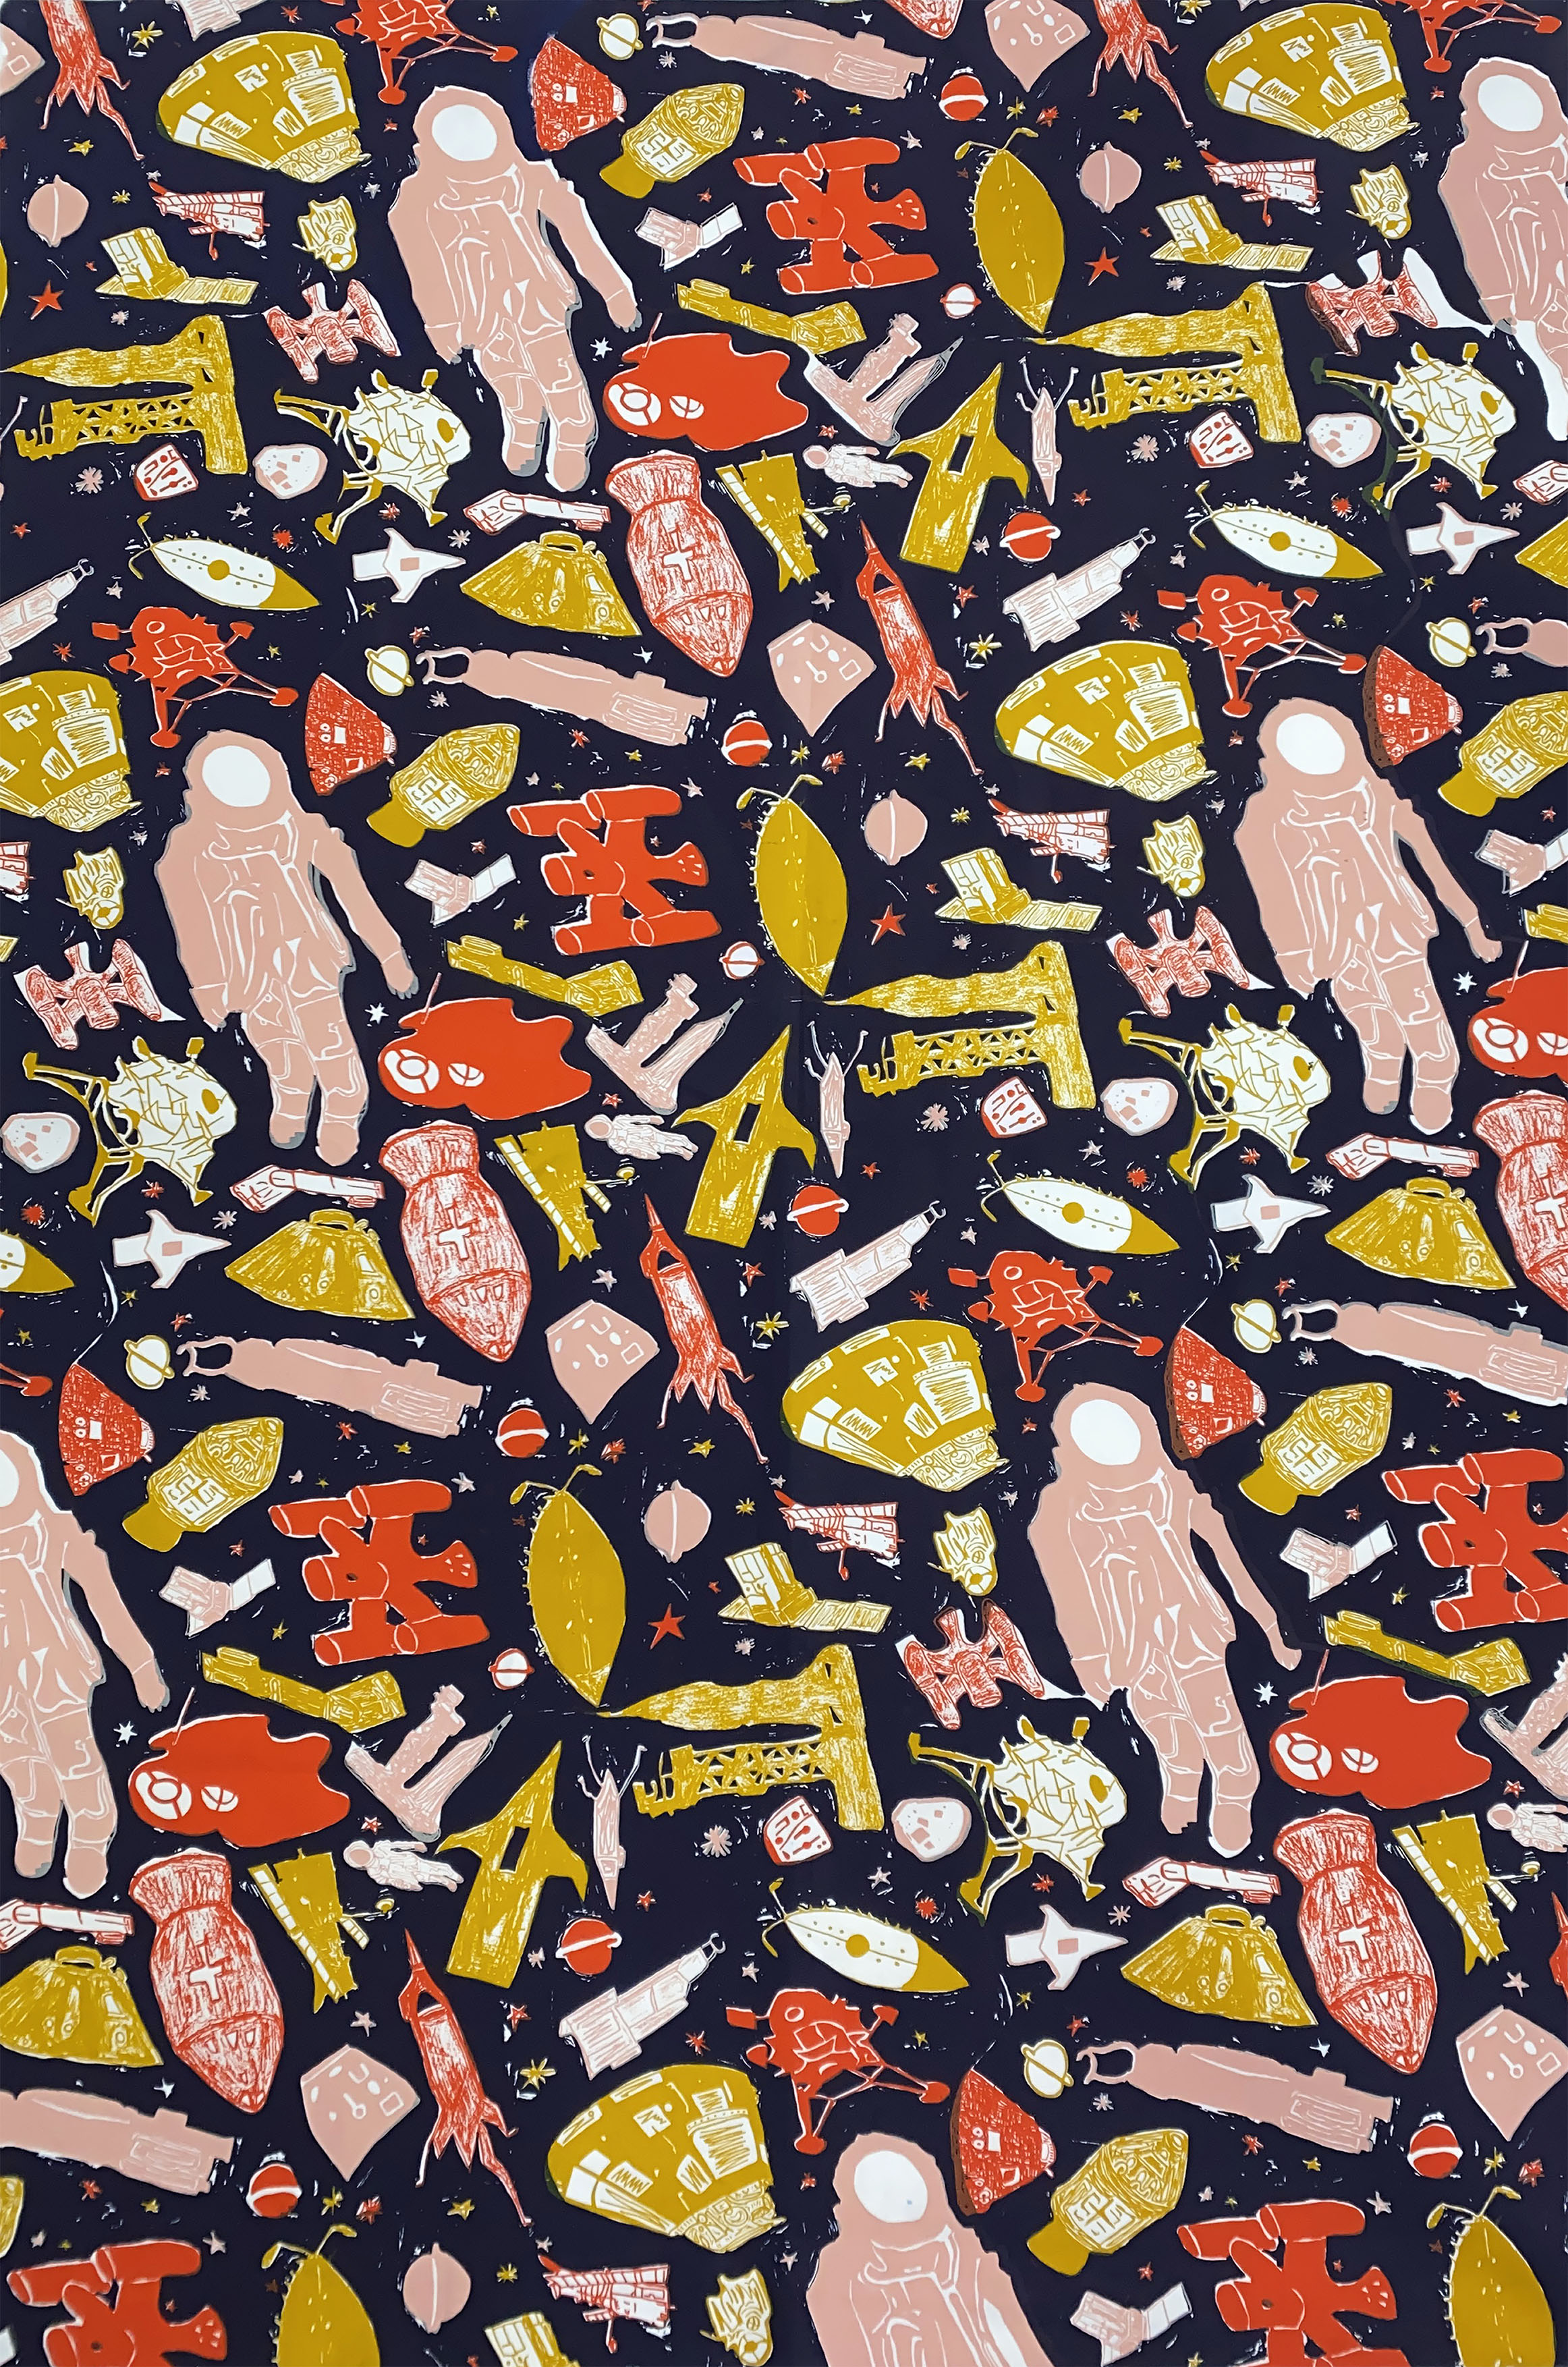 Final print design outcome by Emma Strudwick showing a colourful screen-printed textile pattern in a half-drop repeat.